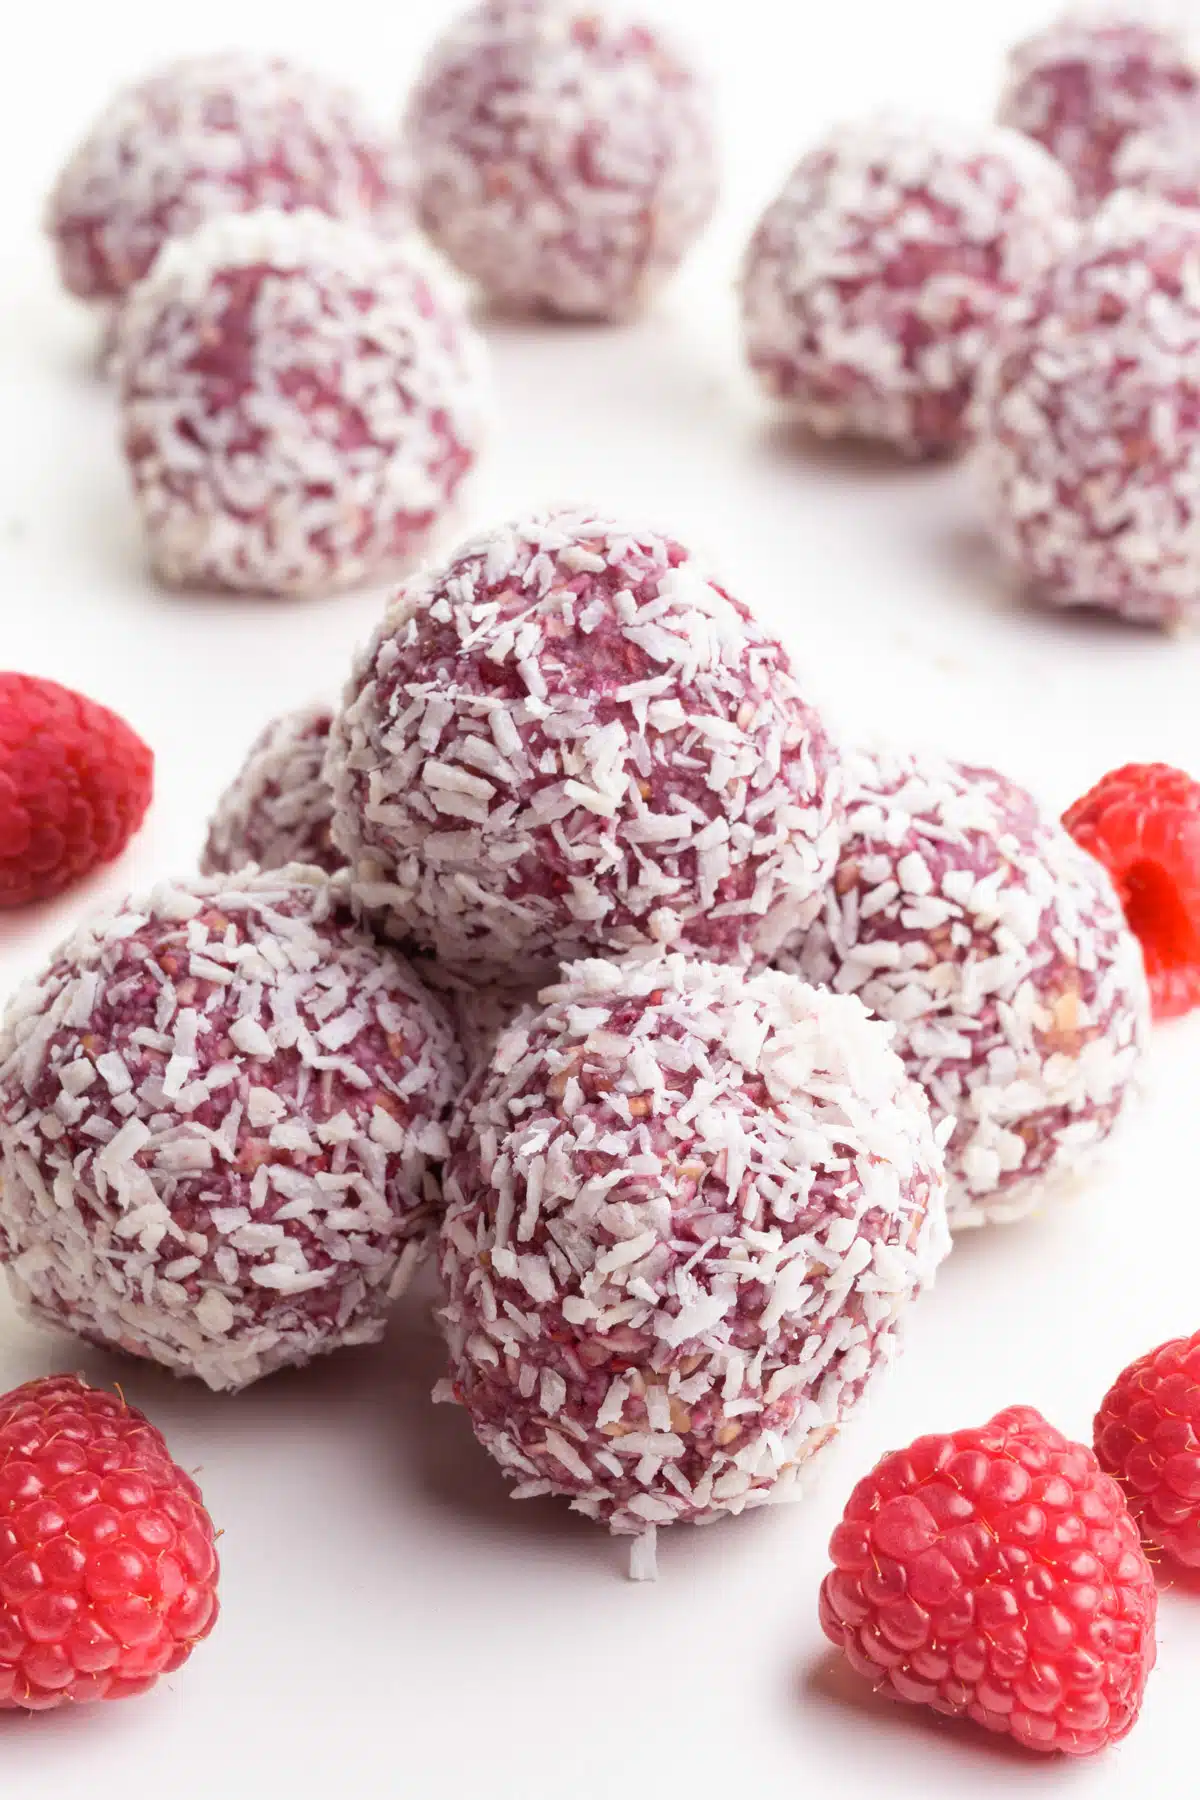 A stack of raspberry coconut bliss balls sits near fresh raspberries and more of the treats in the background.